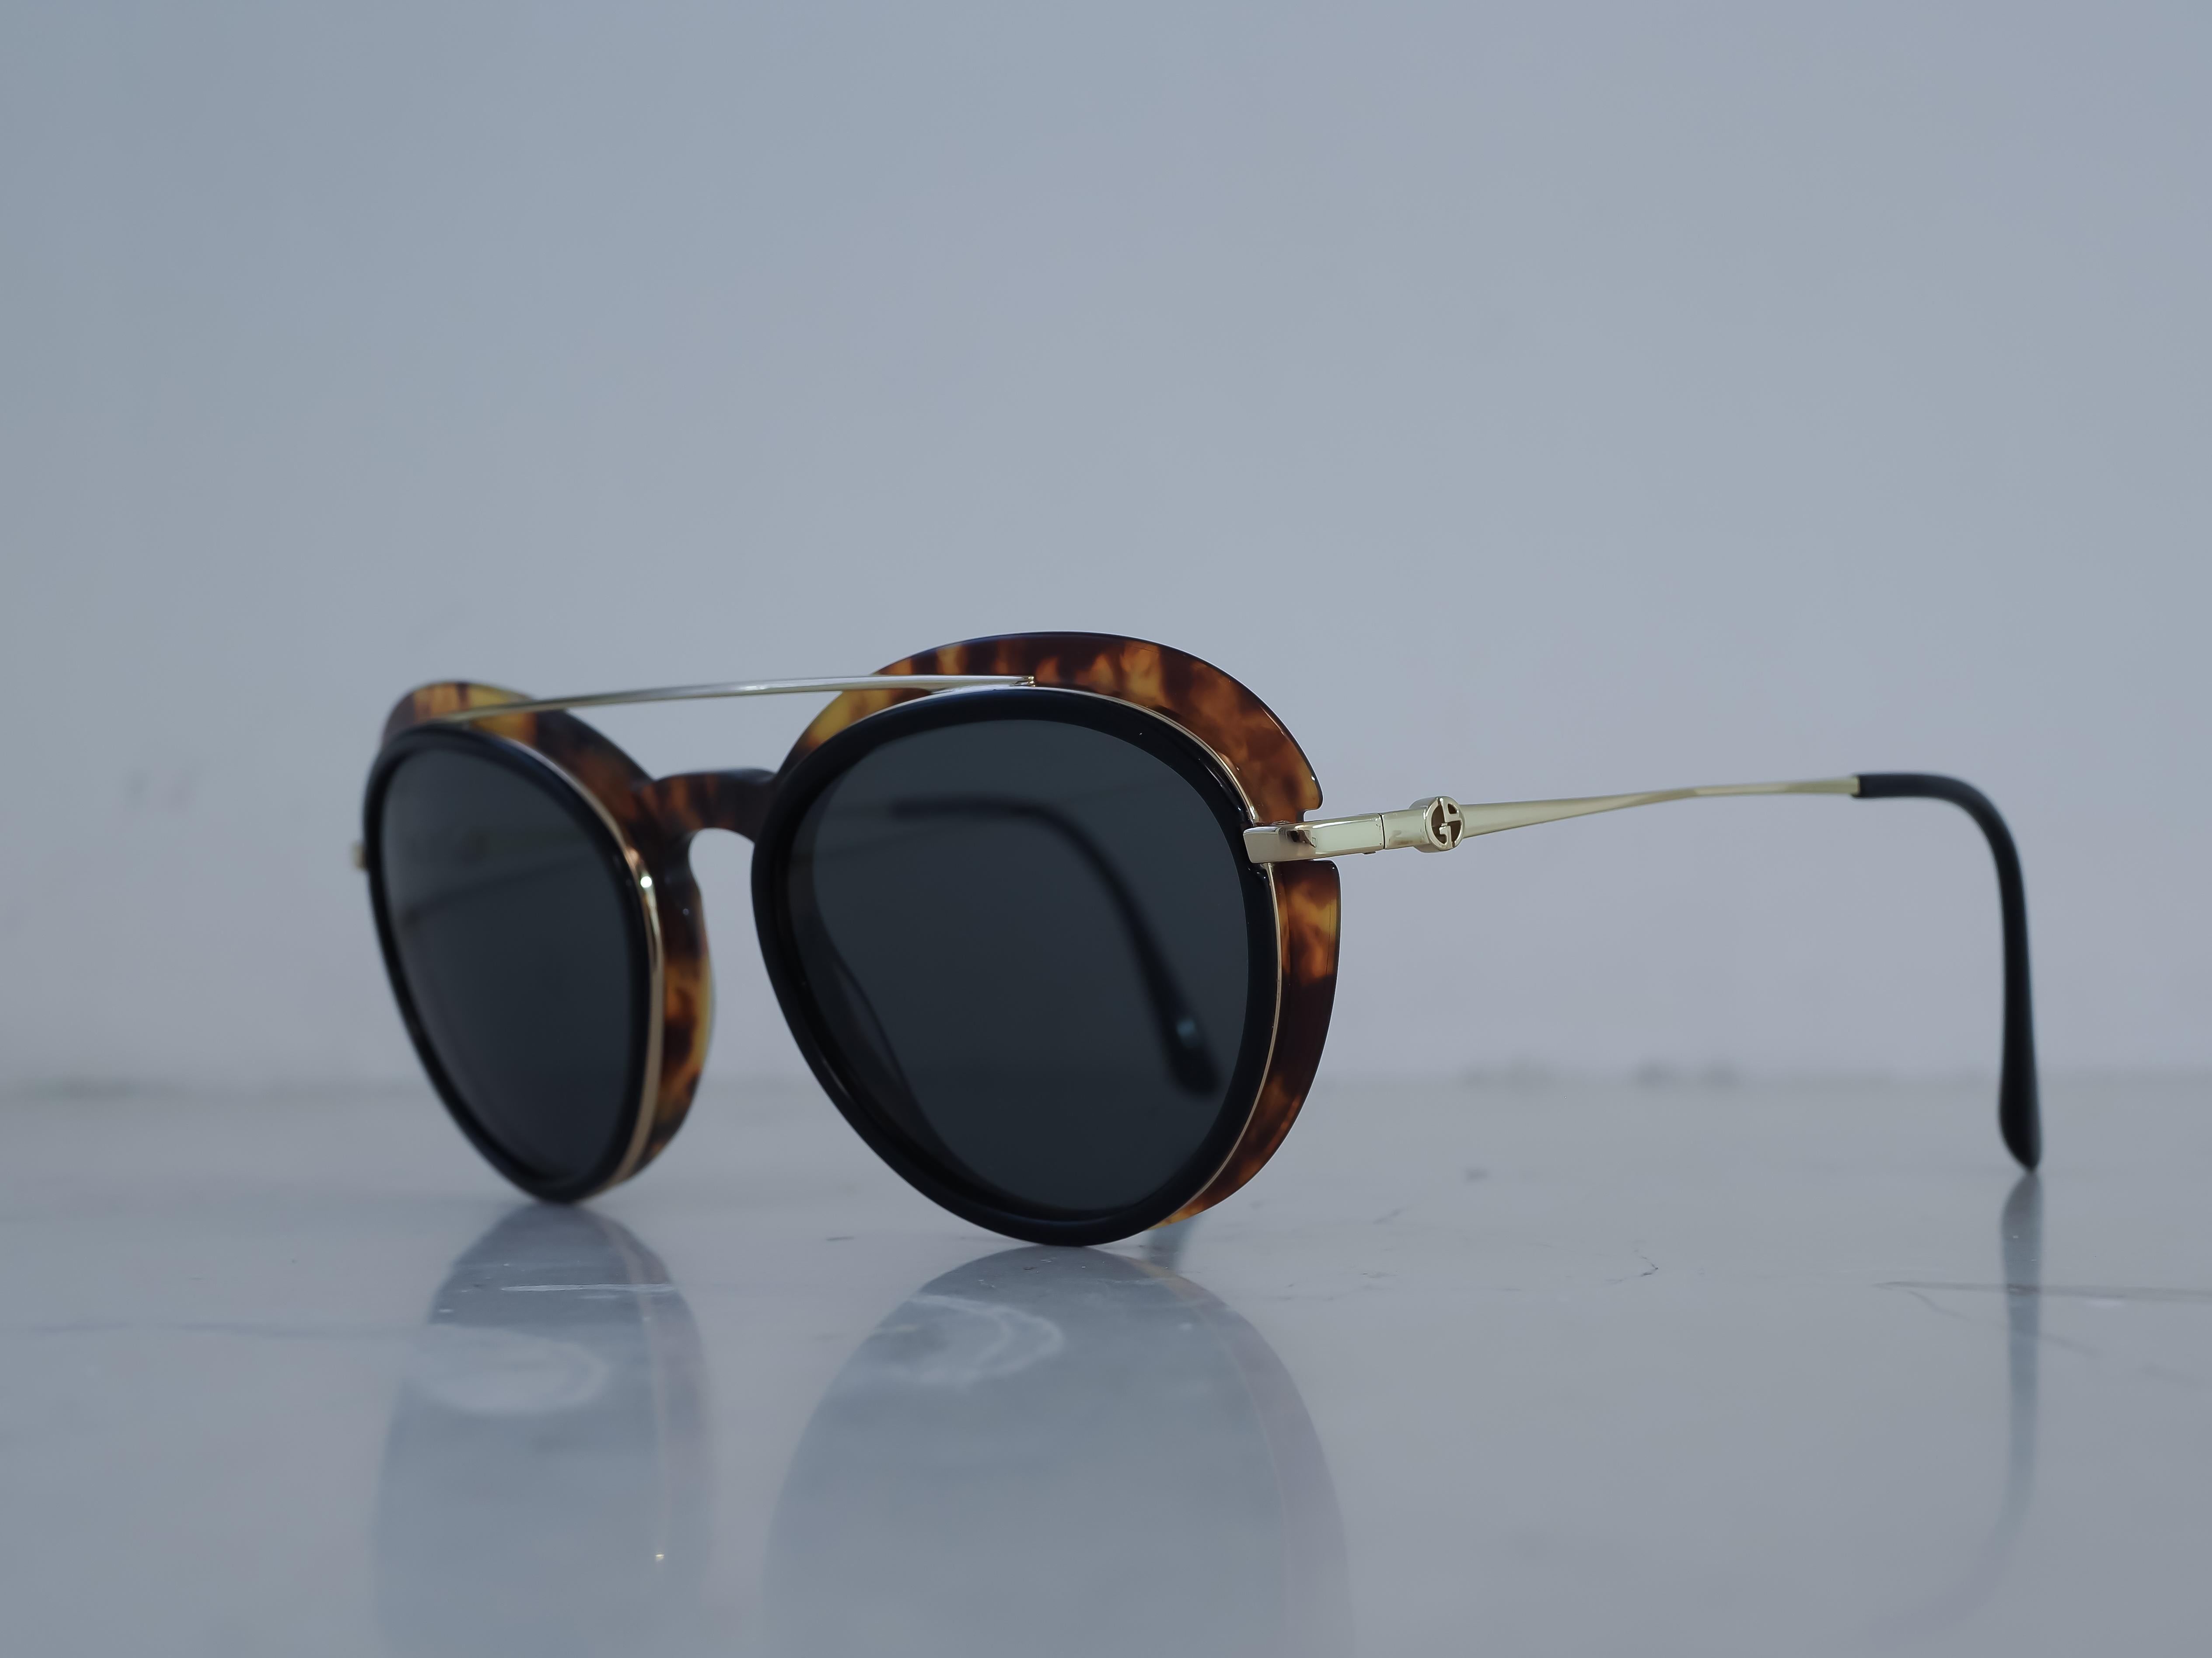 Armani tortoise sunglasses
totally made in italy